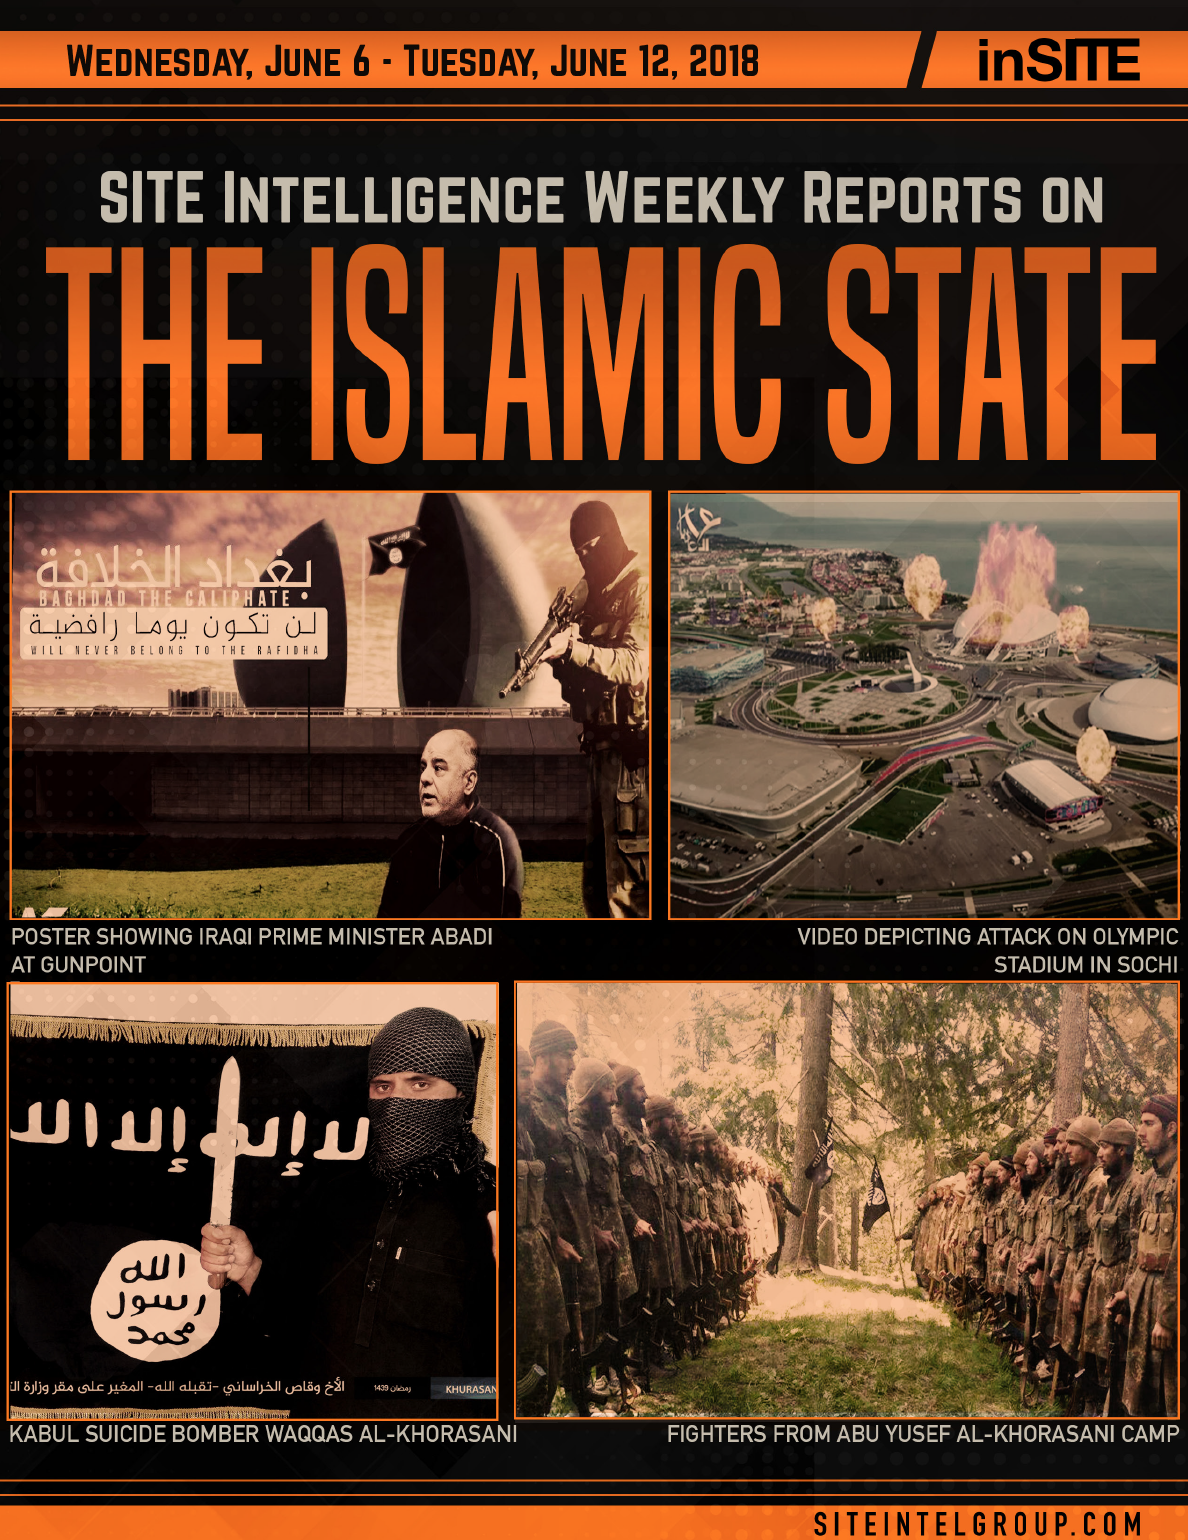 Weekly inSITE on the Islamic State for June 6-12, 2018